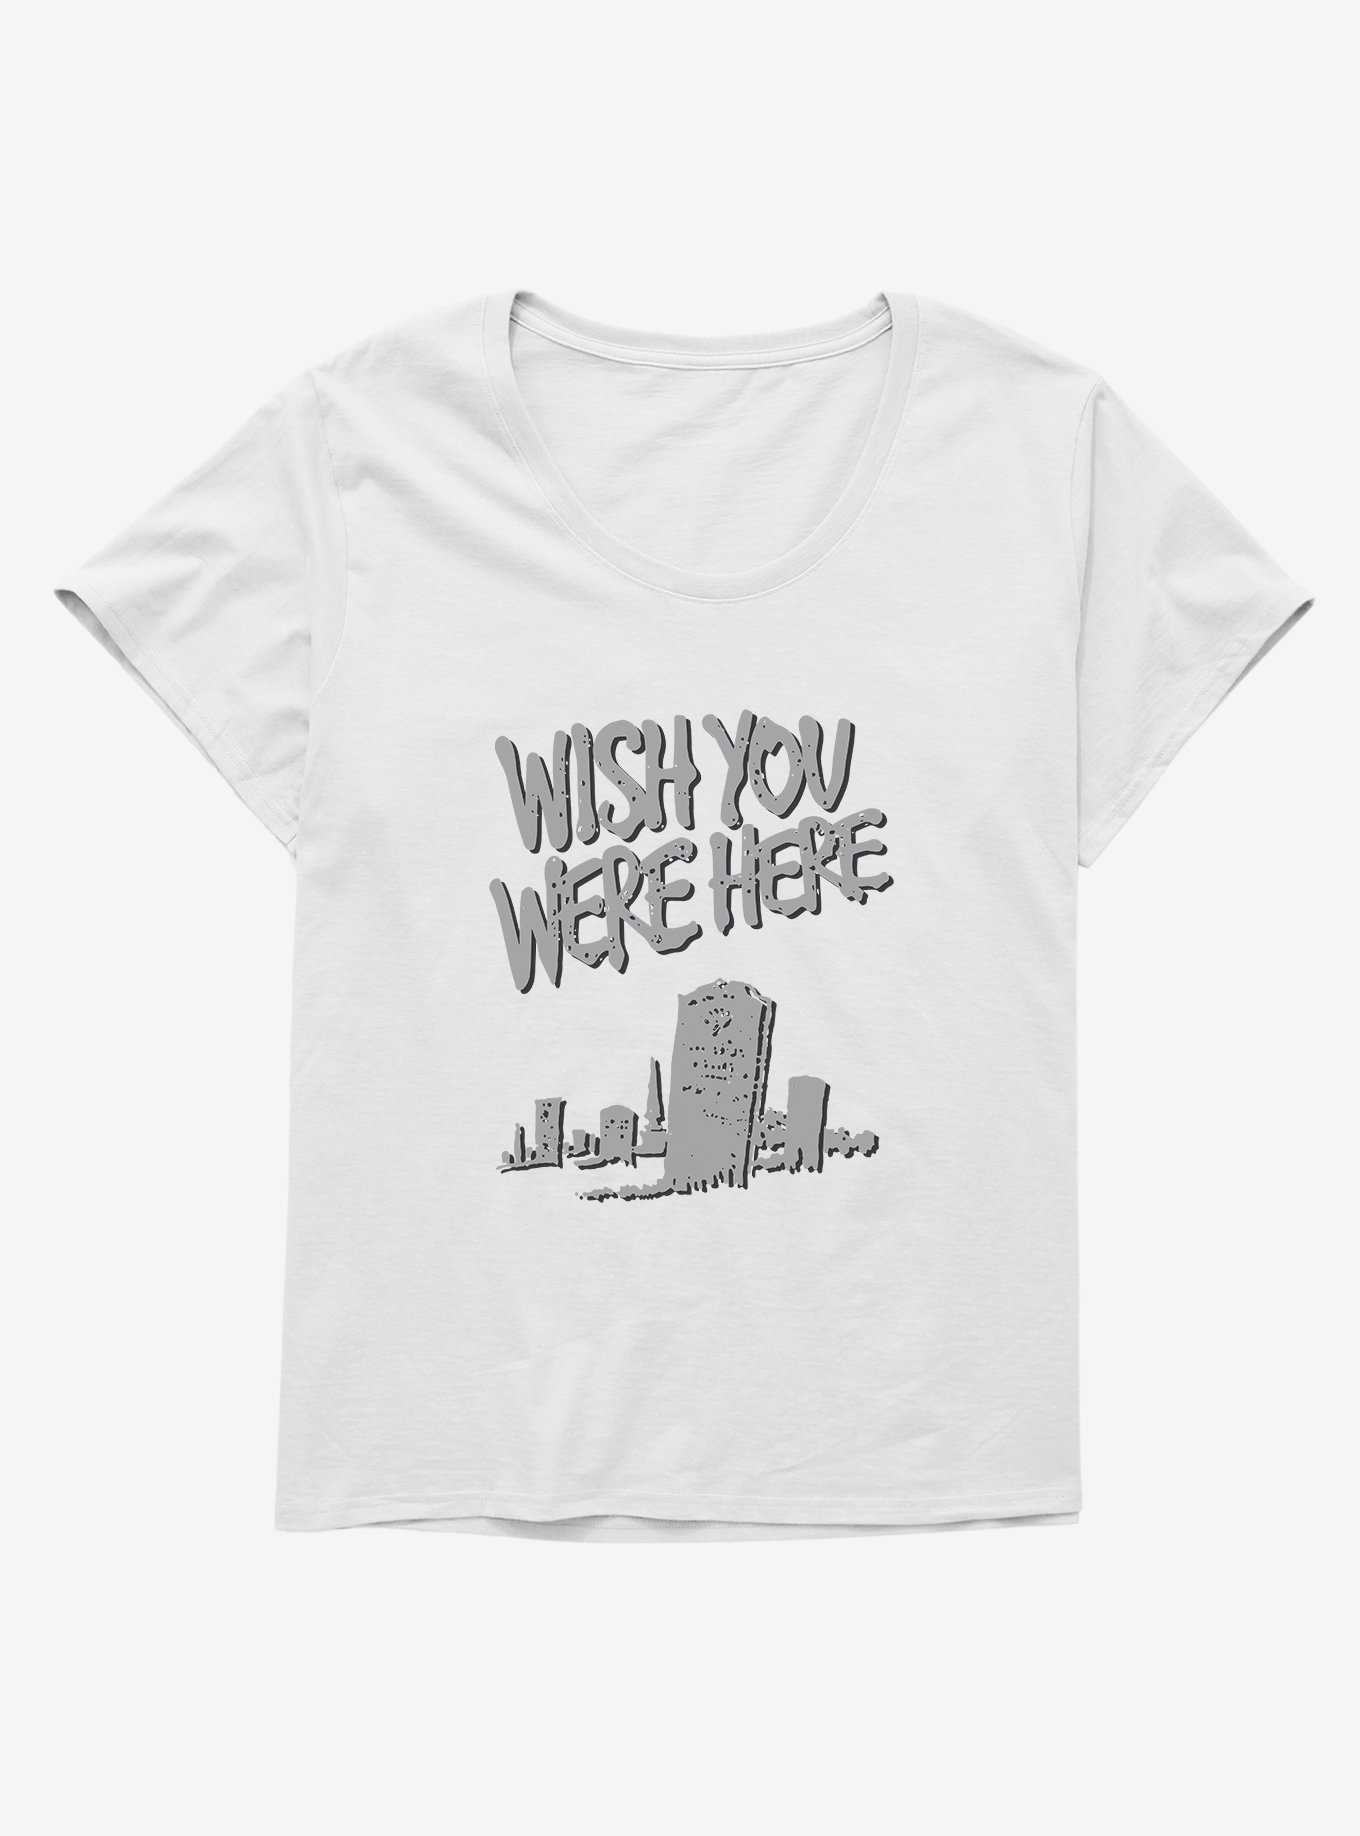 Wish You Were Here Tombstone Girls T-Shirt Plus Size, , hi-res